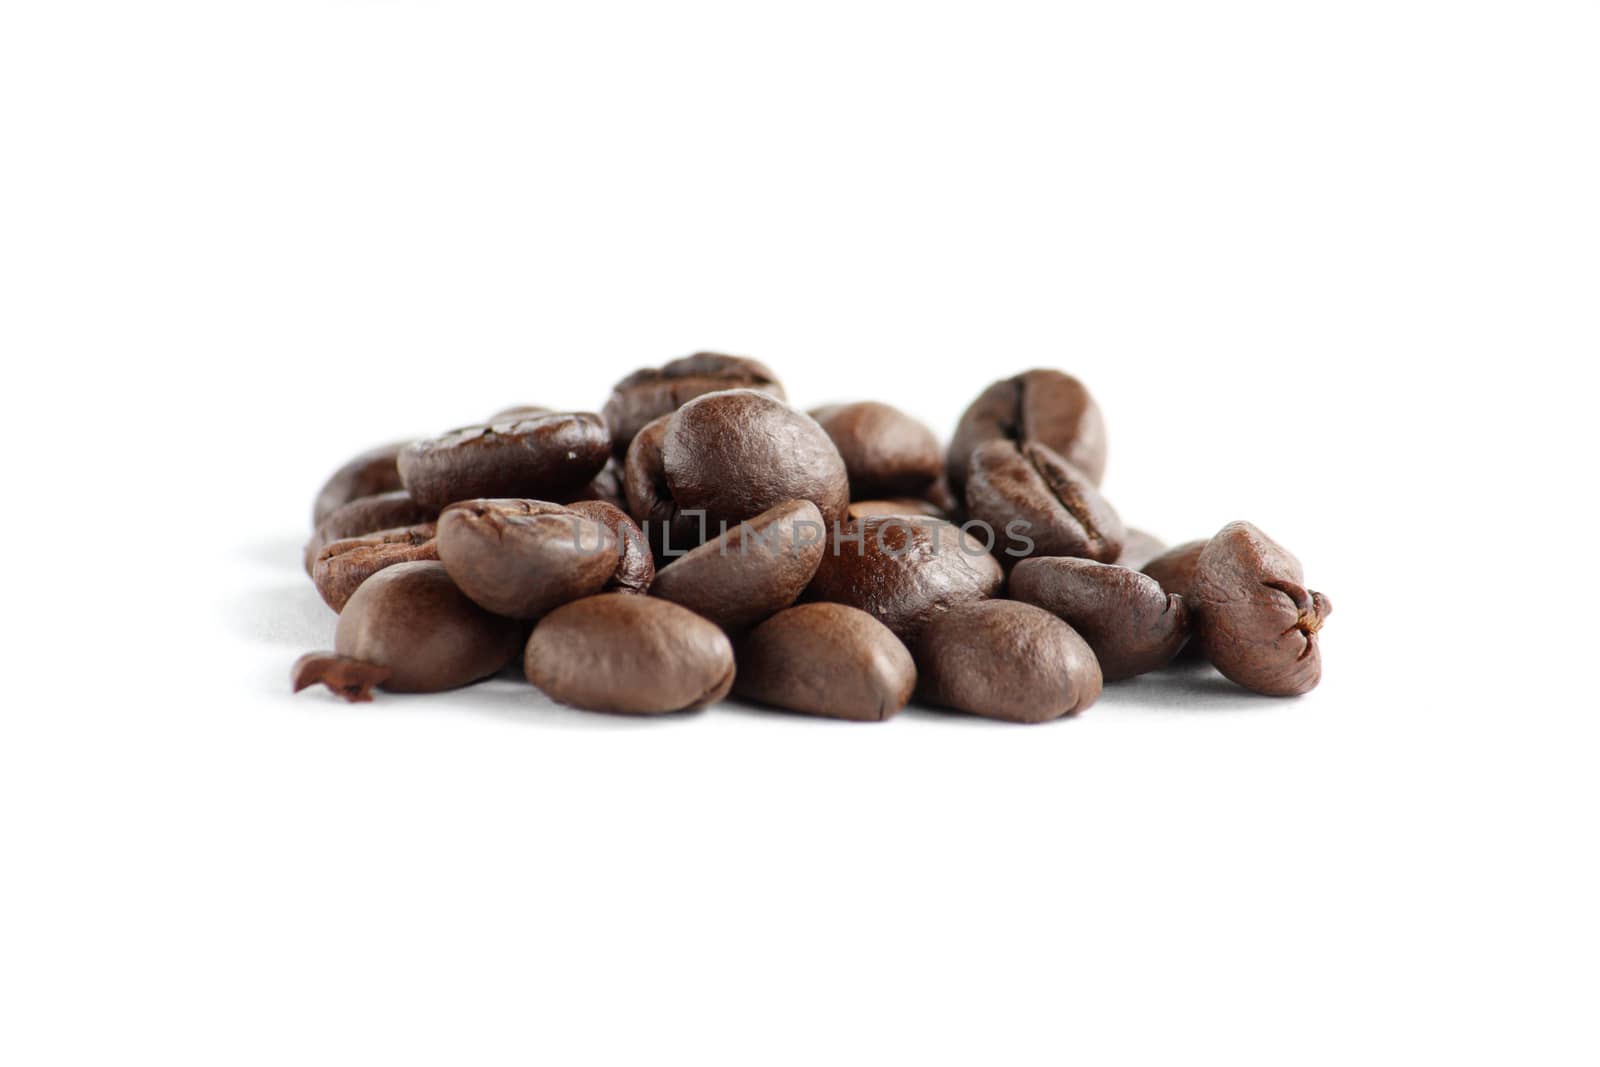 A lot of roasted coffee beans at dark background